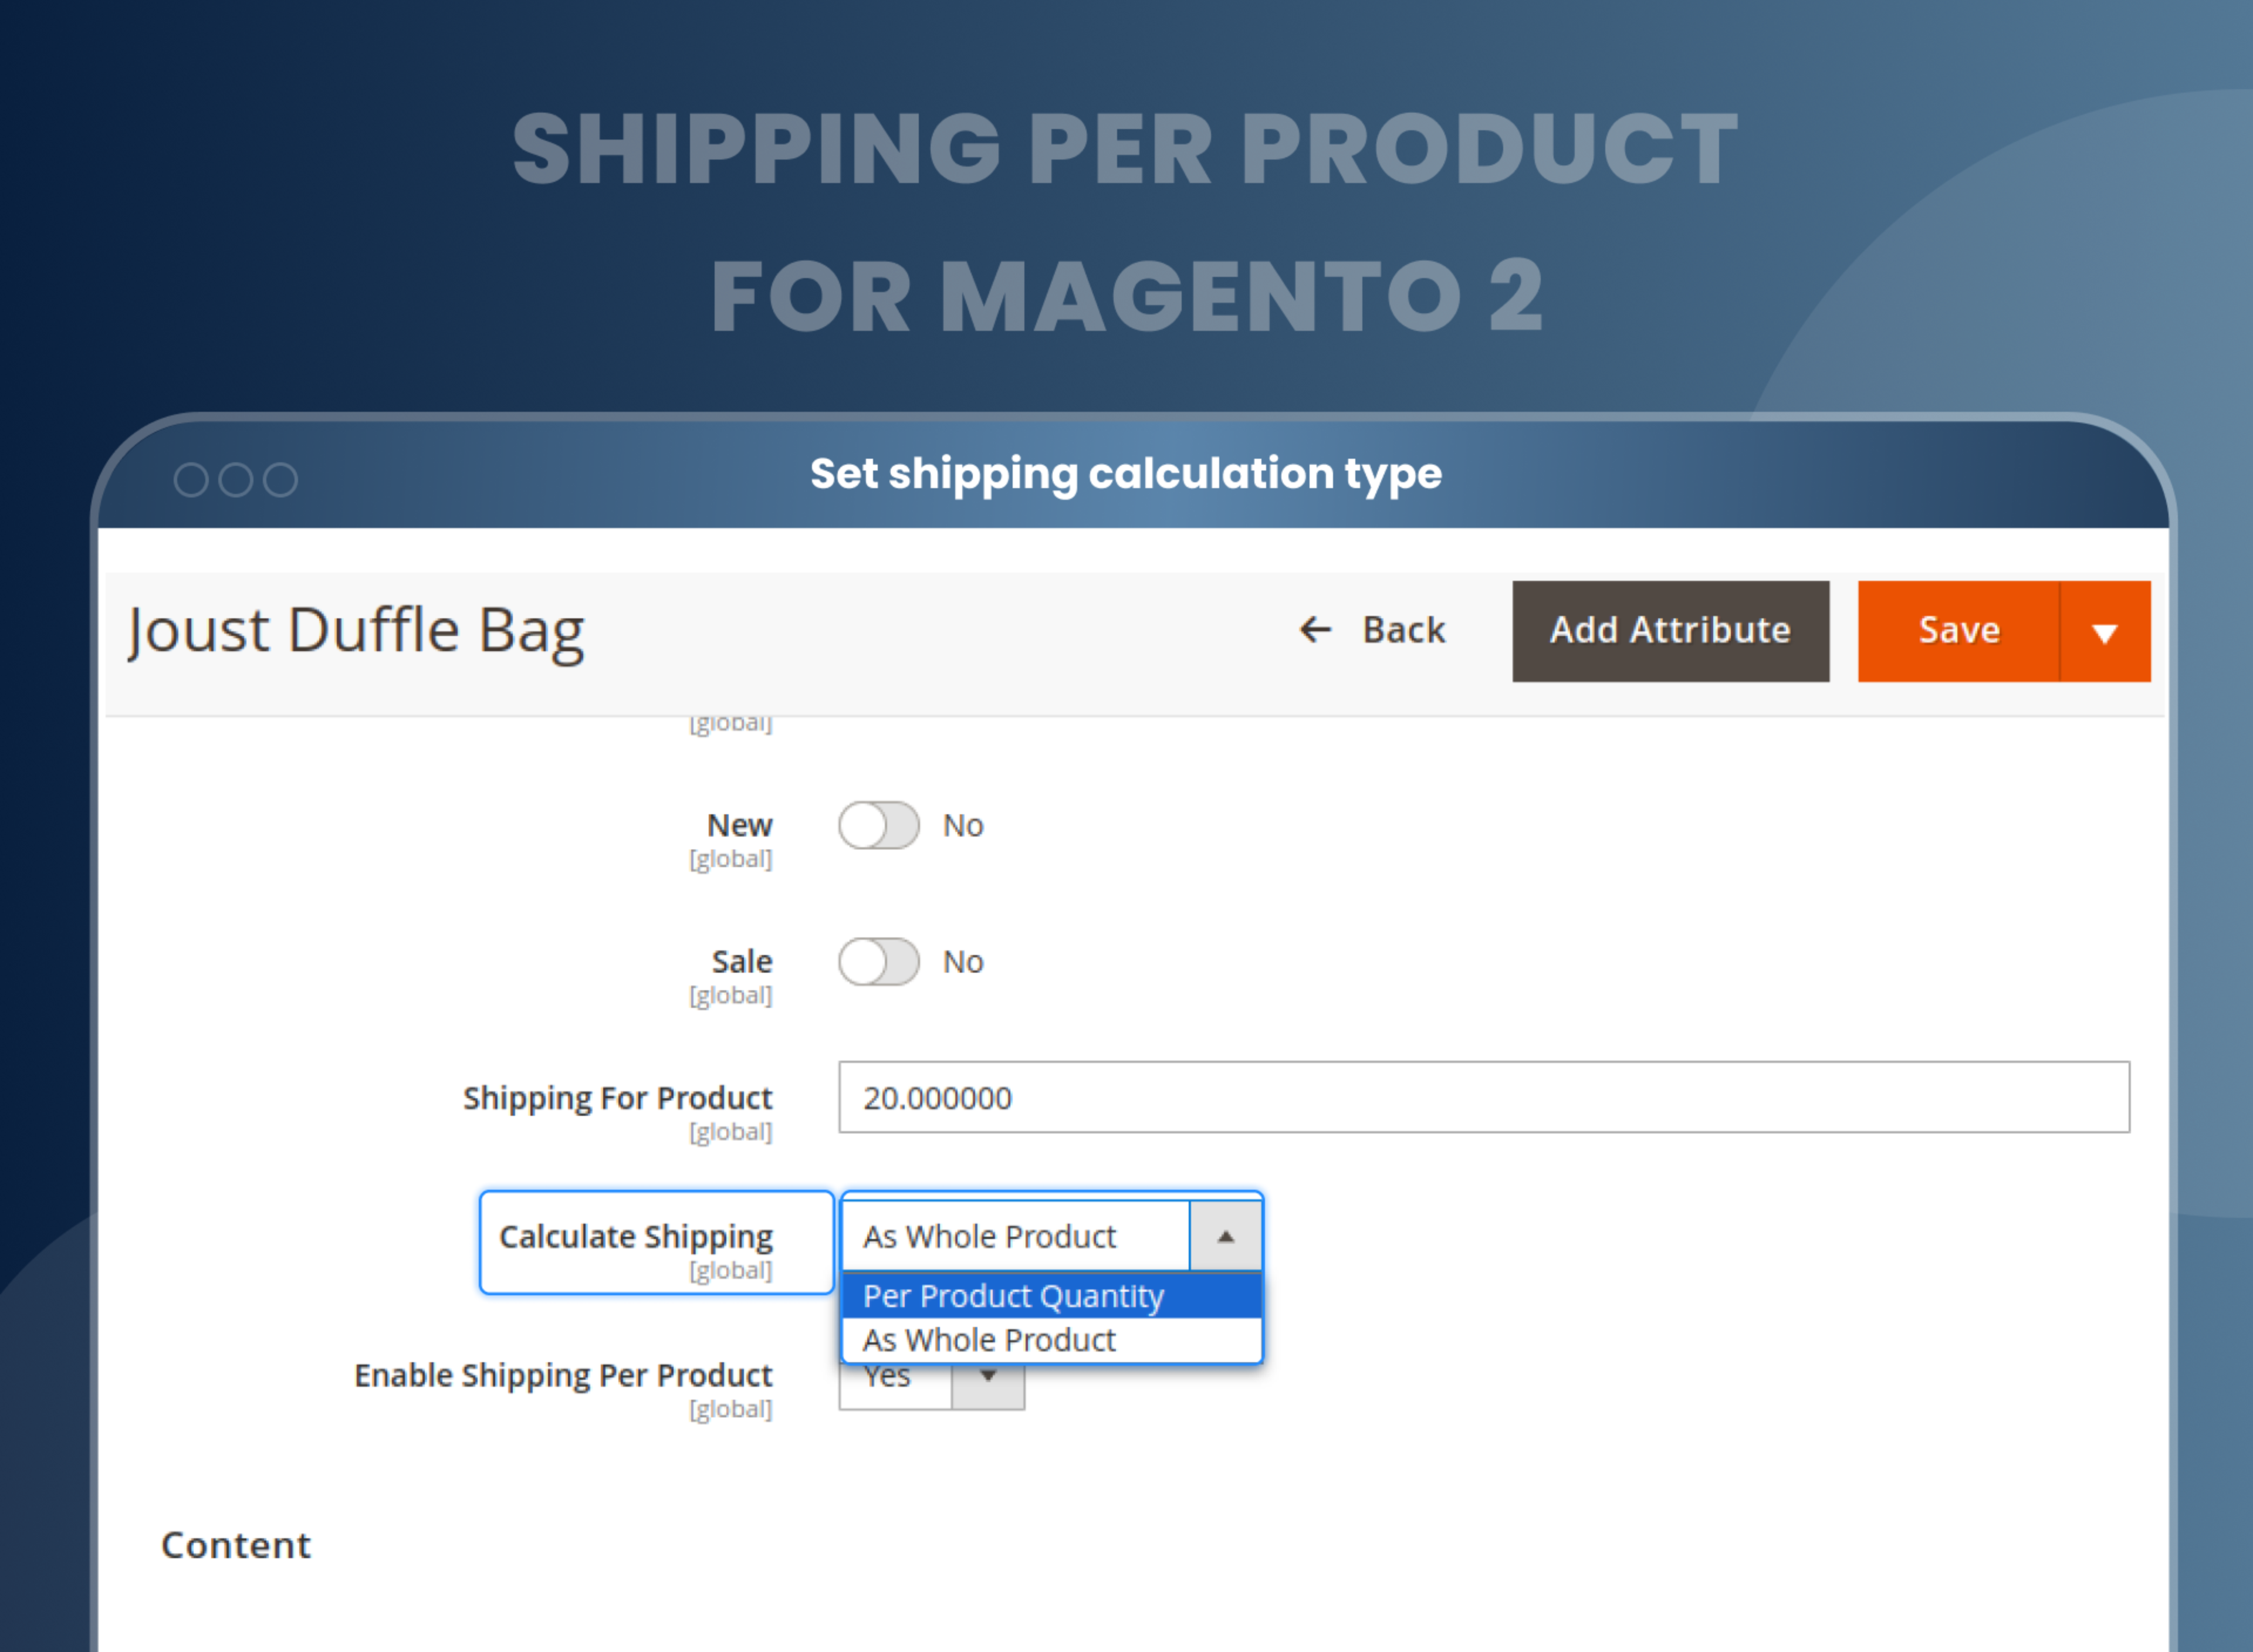 Set shipping calculation type